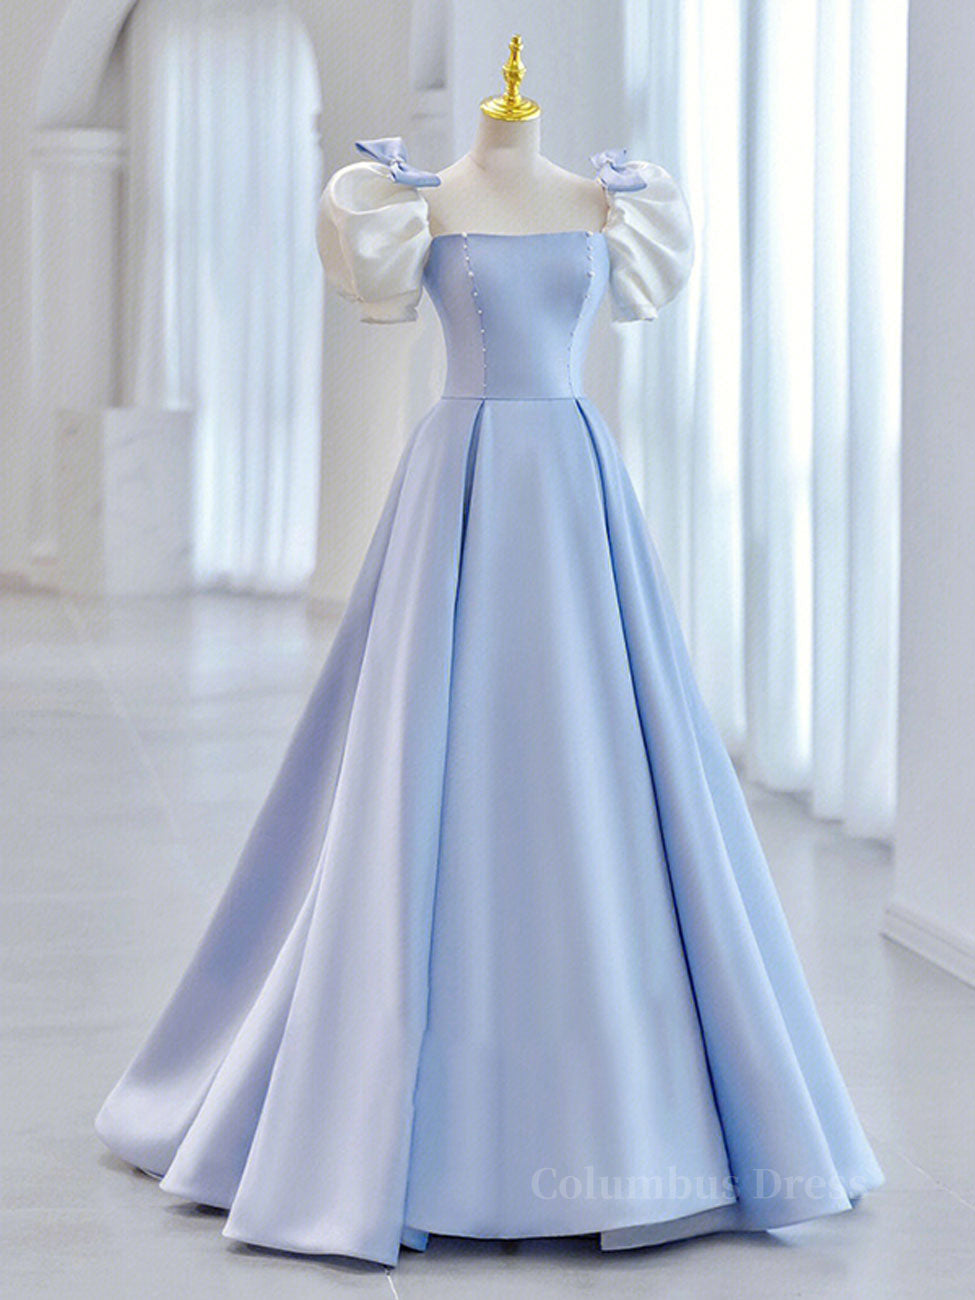 Prom Dresses For Curvy Figures, Blue Satin Long Prom Dresses, Blue Formal Graduation Dresses